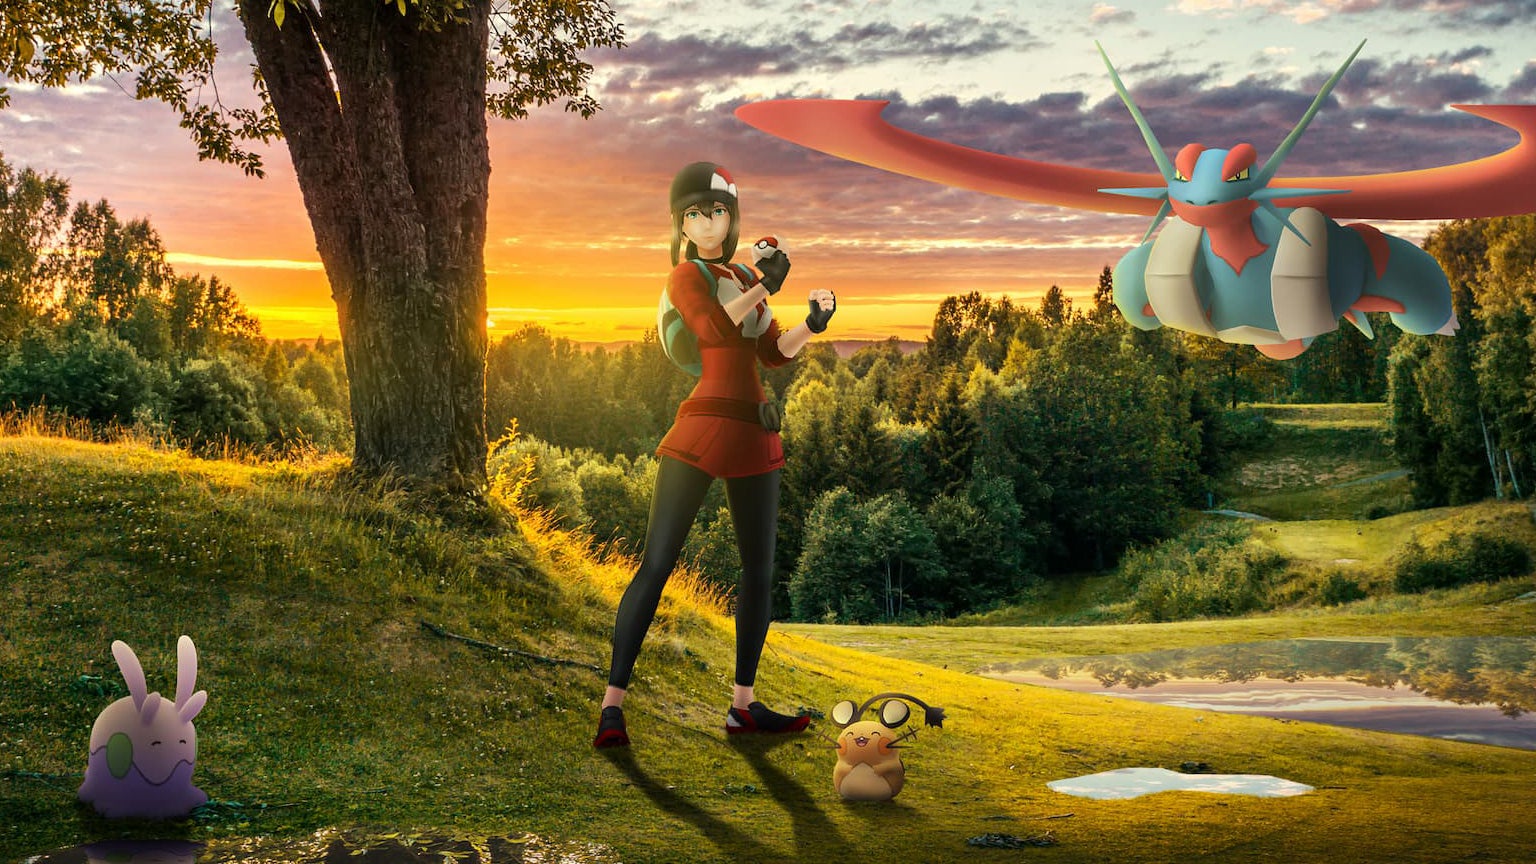 Image for Pokémon Go Twinkling Fantasy Collection Challenge, field research tasks and bonuses